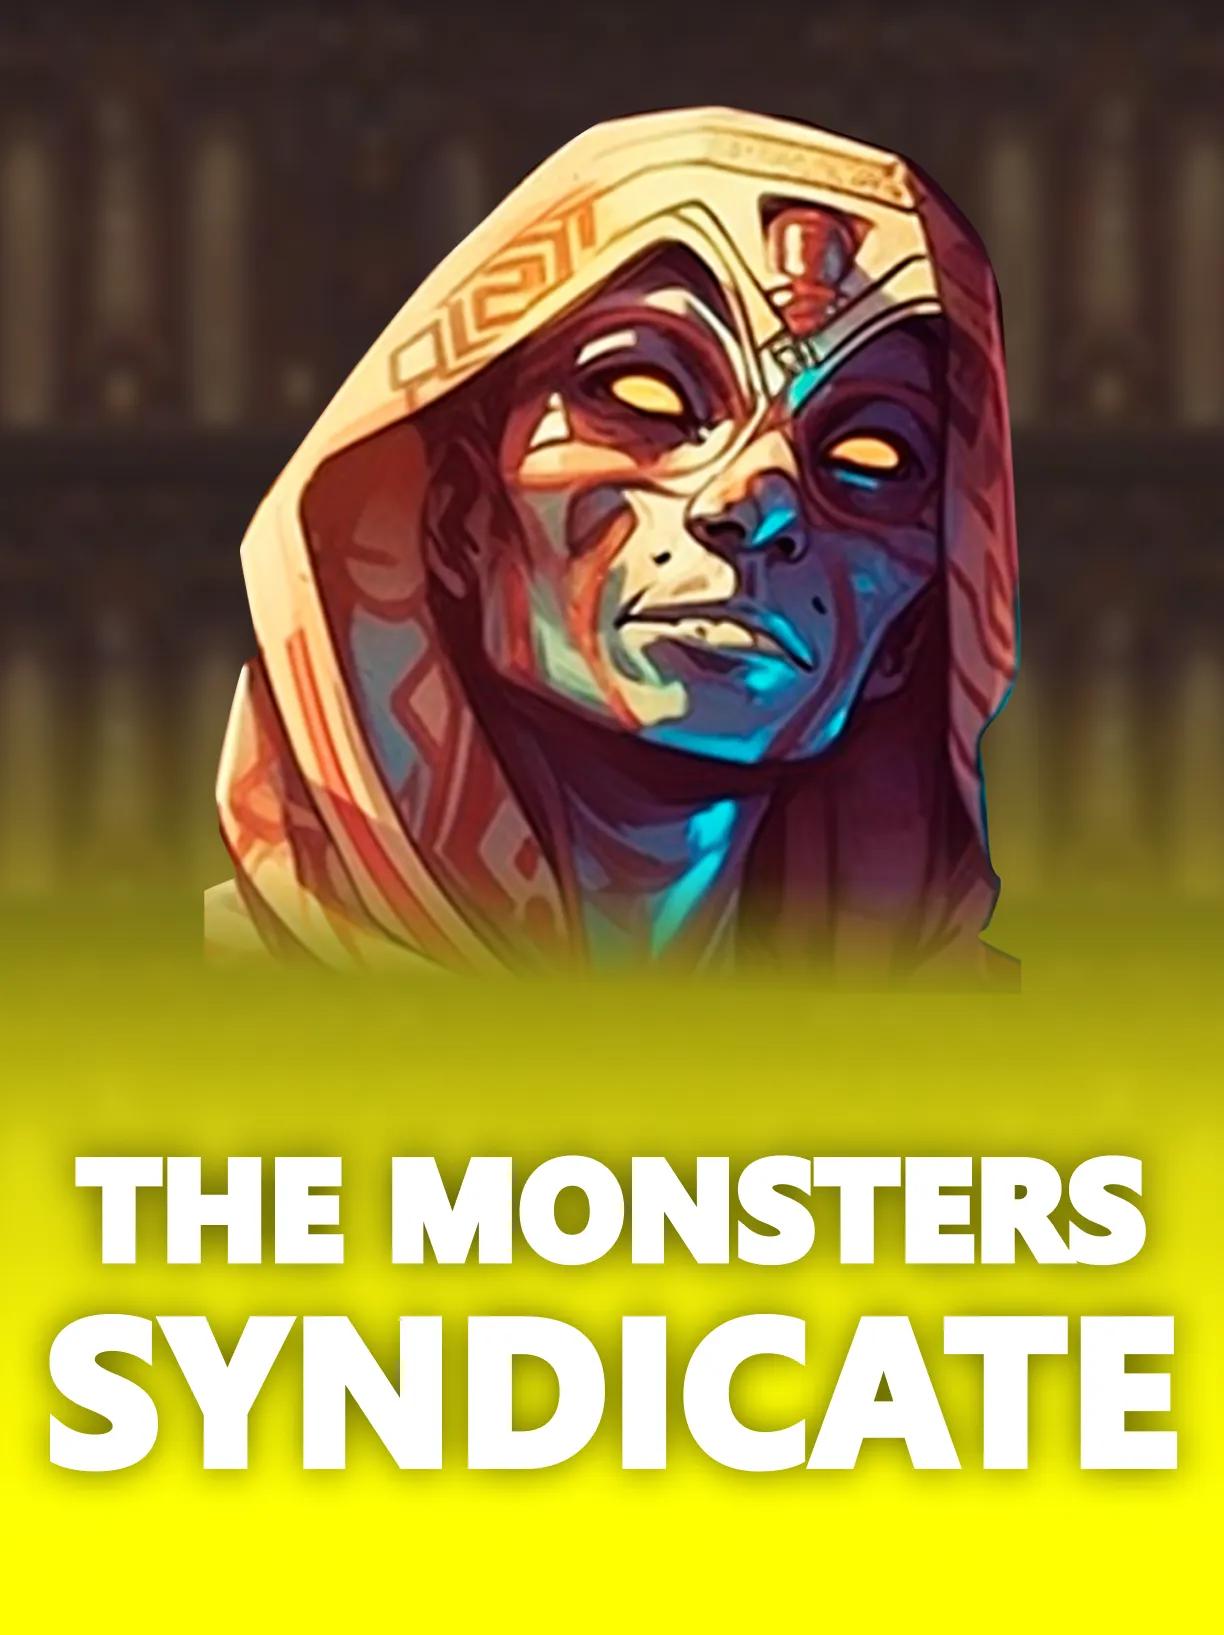 ug_The_Monsters_Syndicate_square.webp